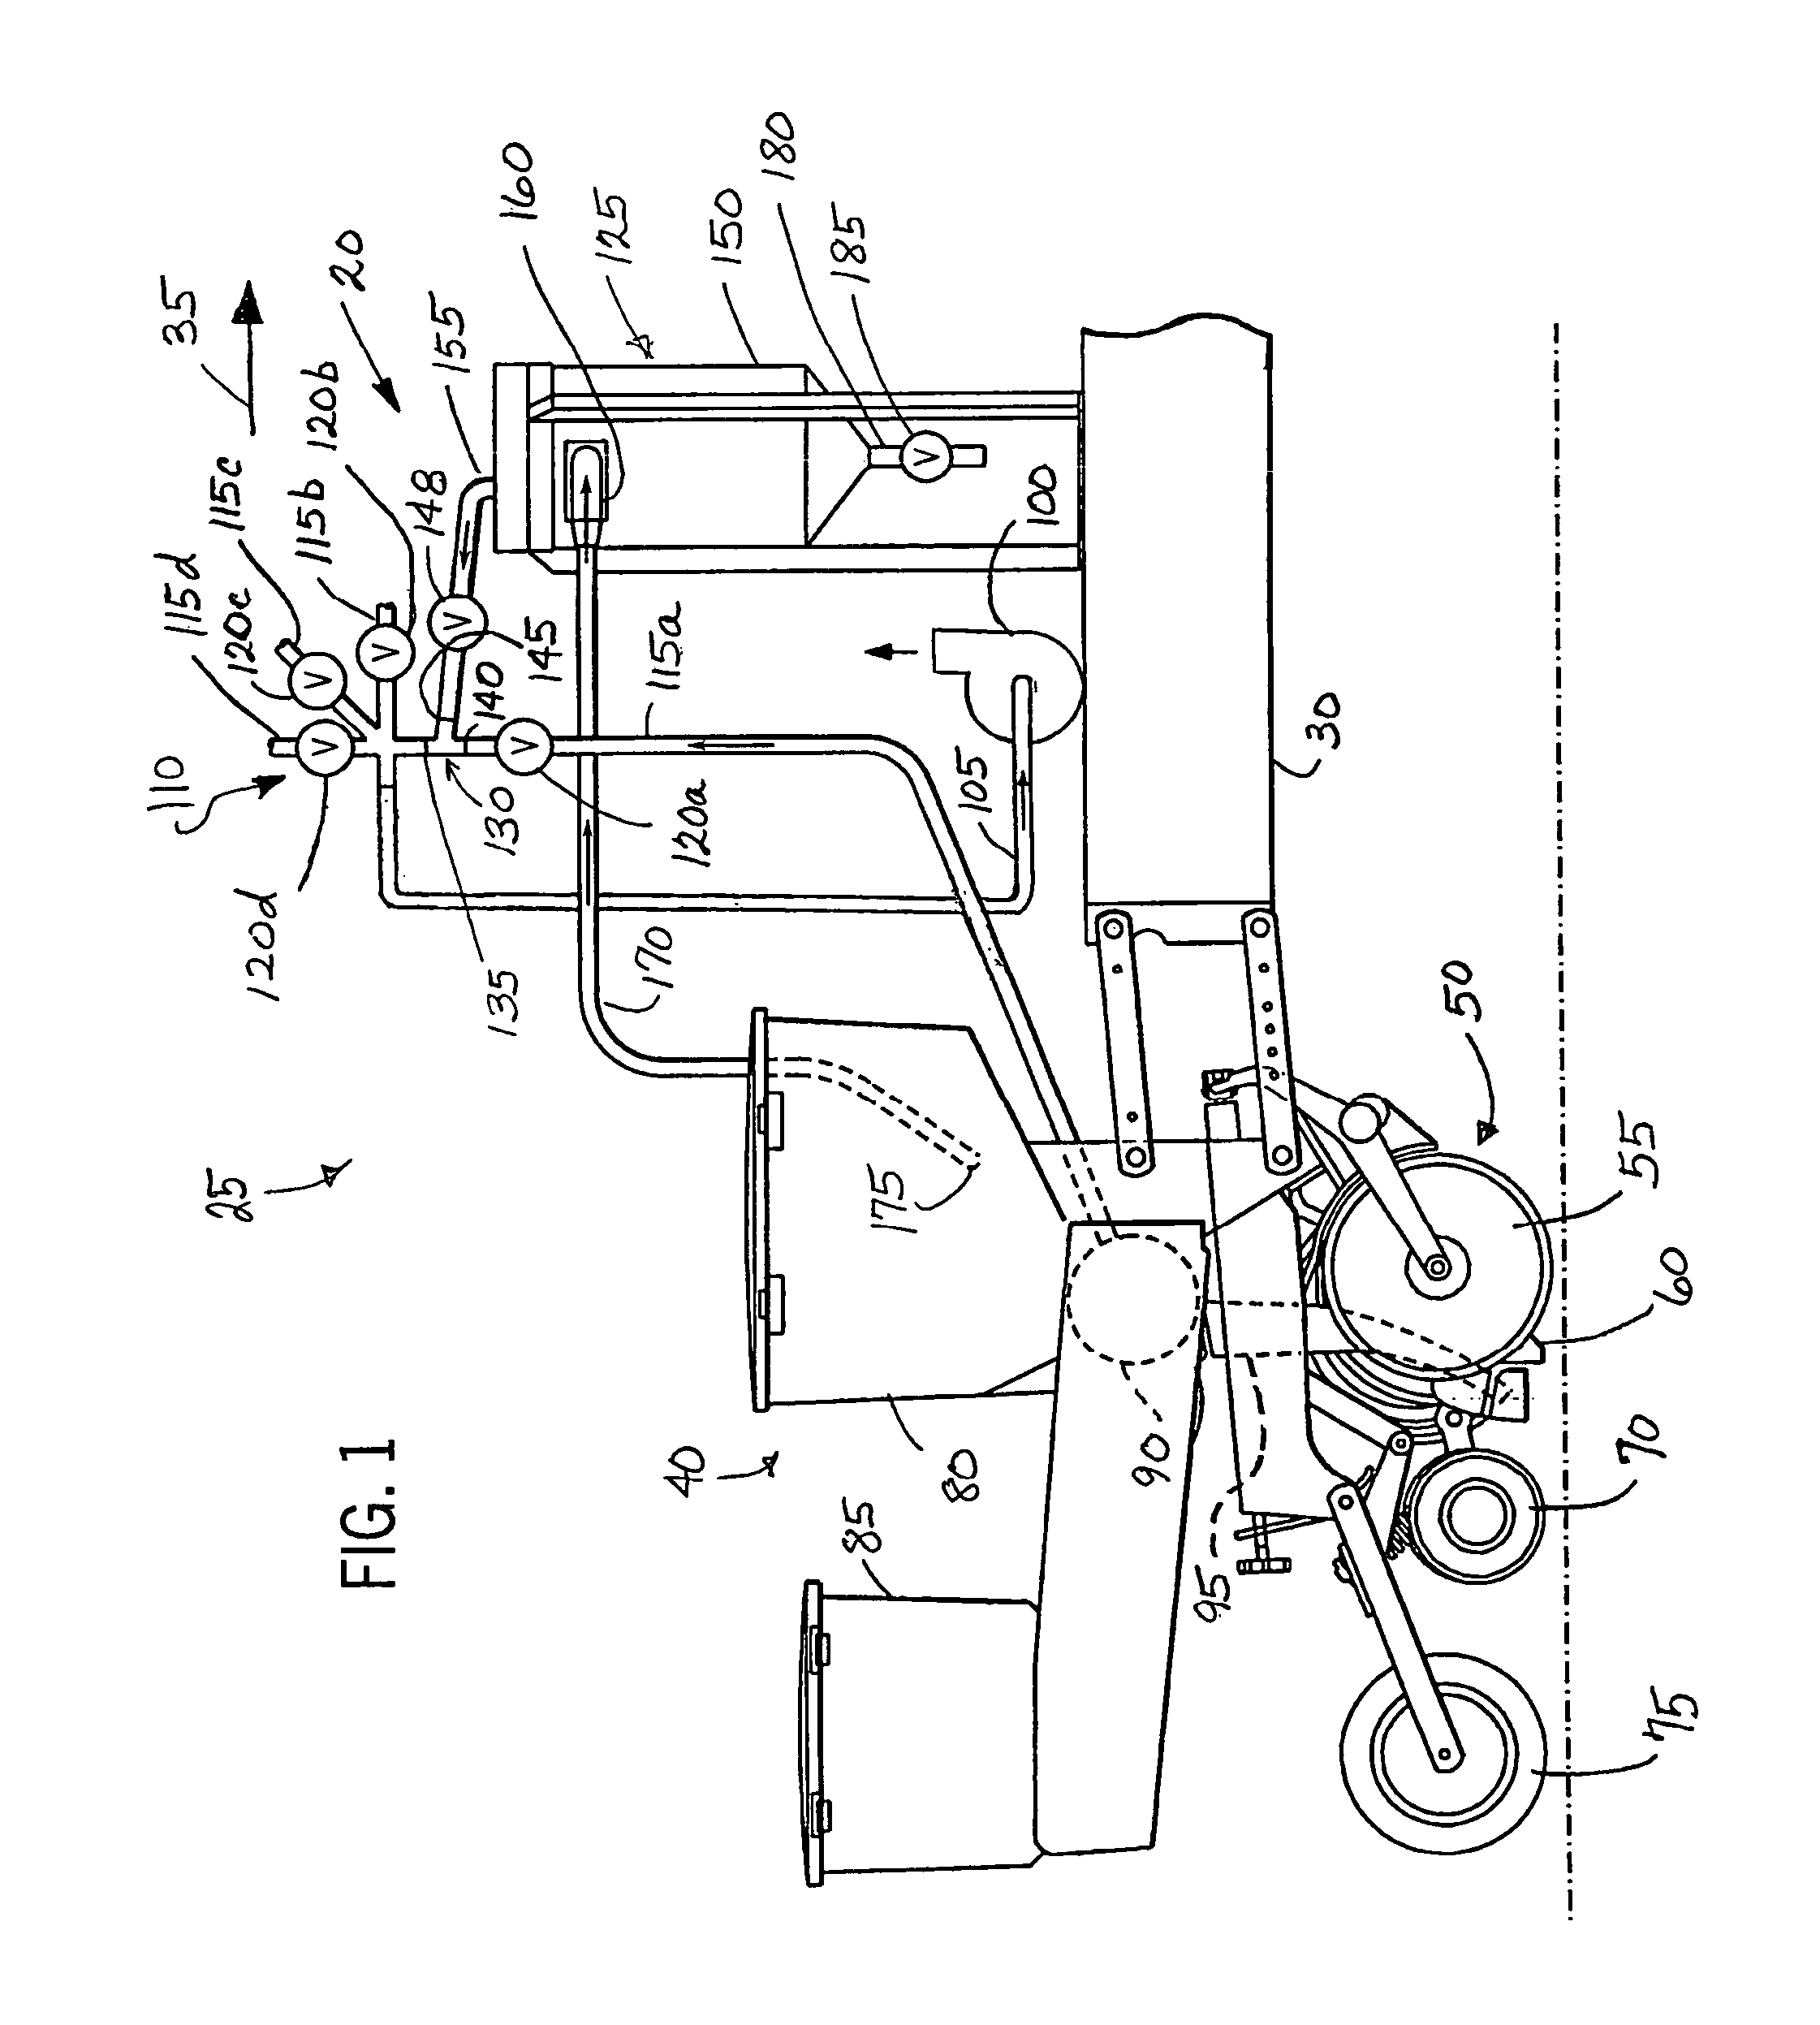 Cleanup system for a planting implement